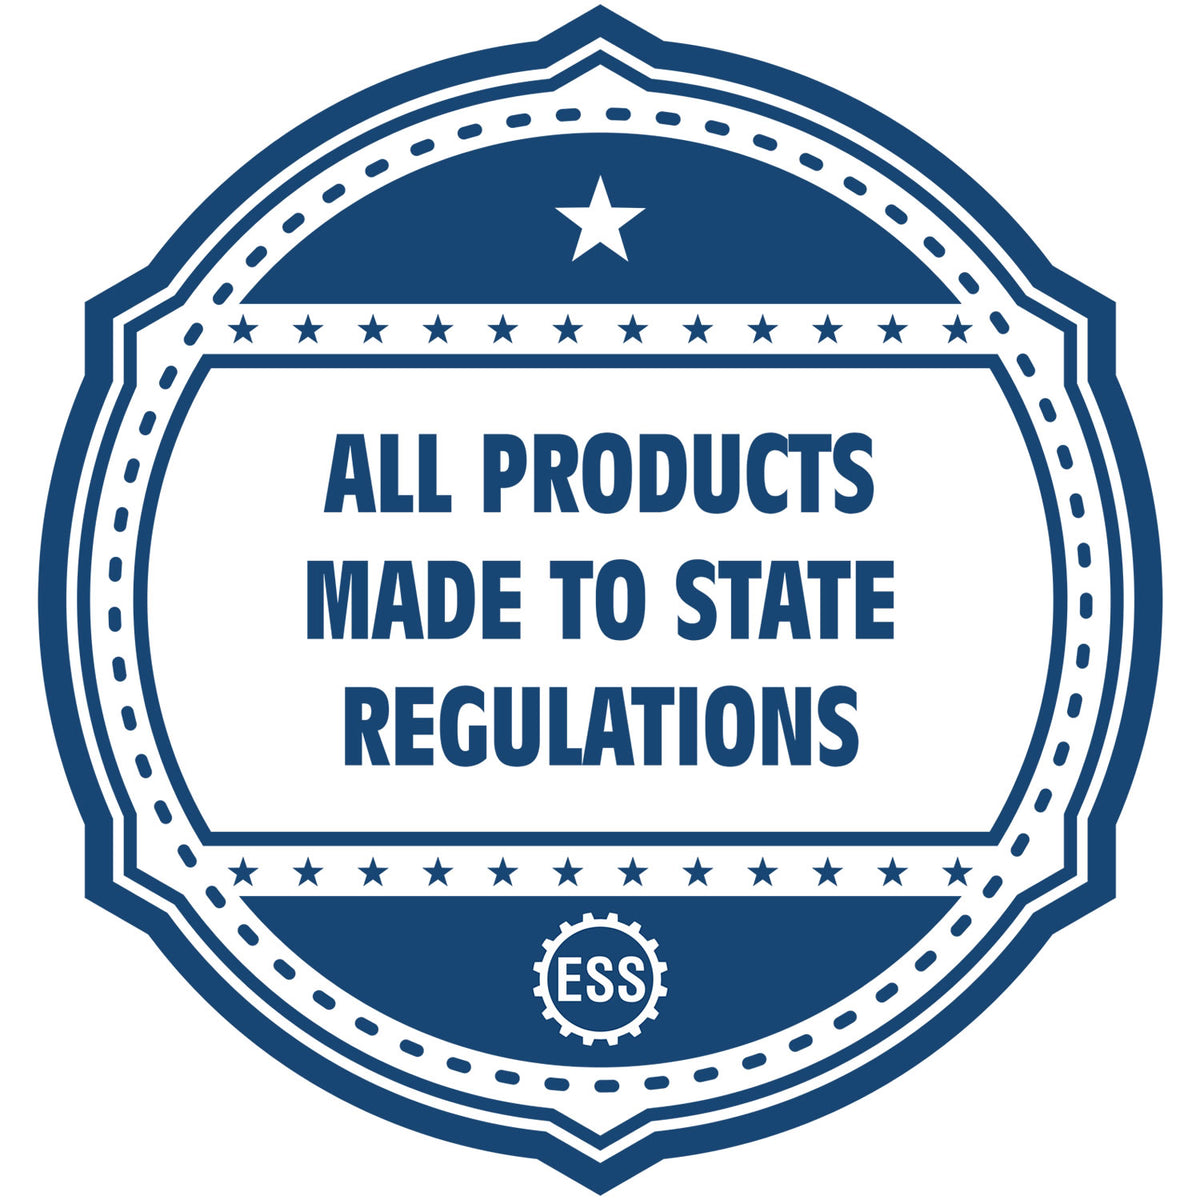 An icon or badge element for the Handheld Maine Architect Seal Embosser showing that this product is made in compliance with state regulations.